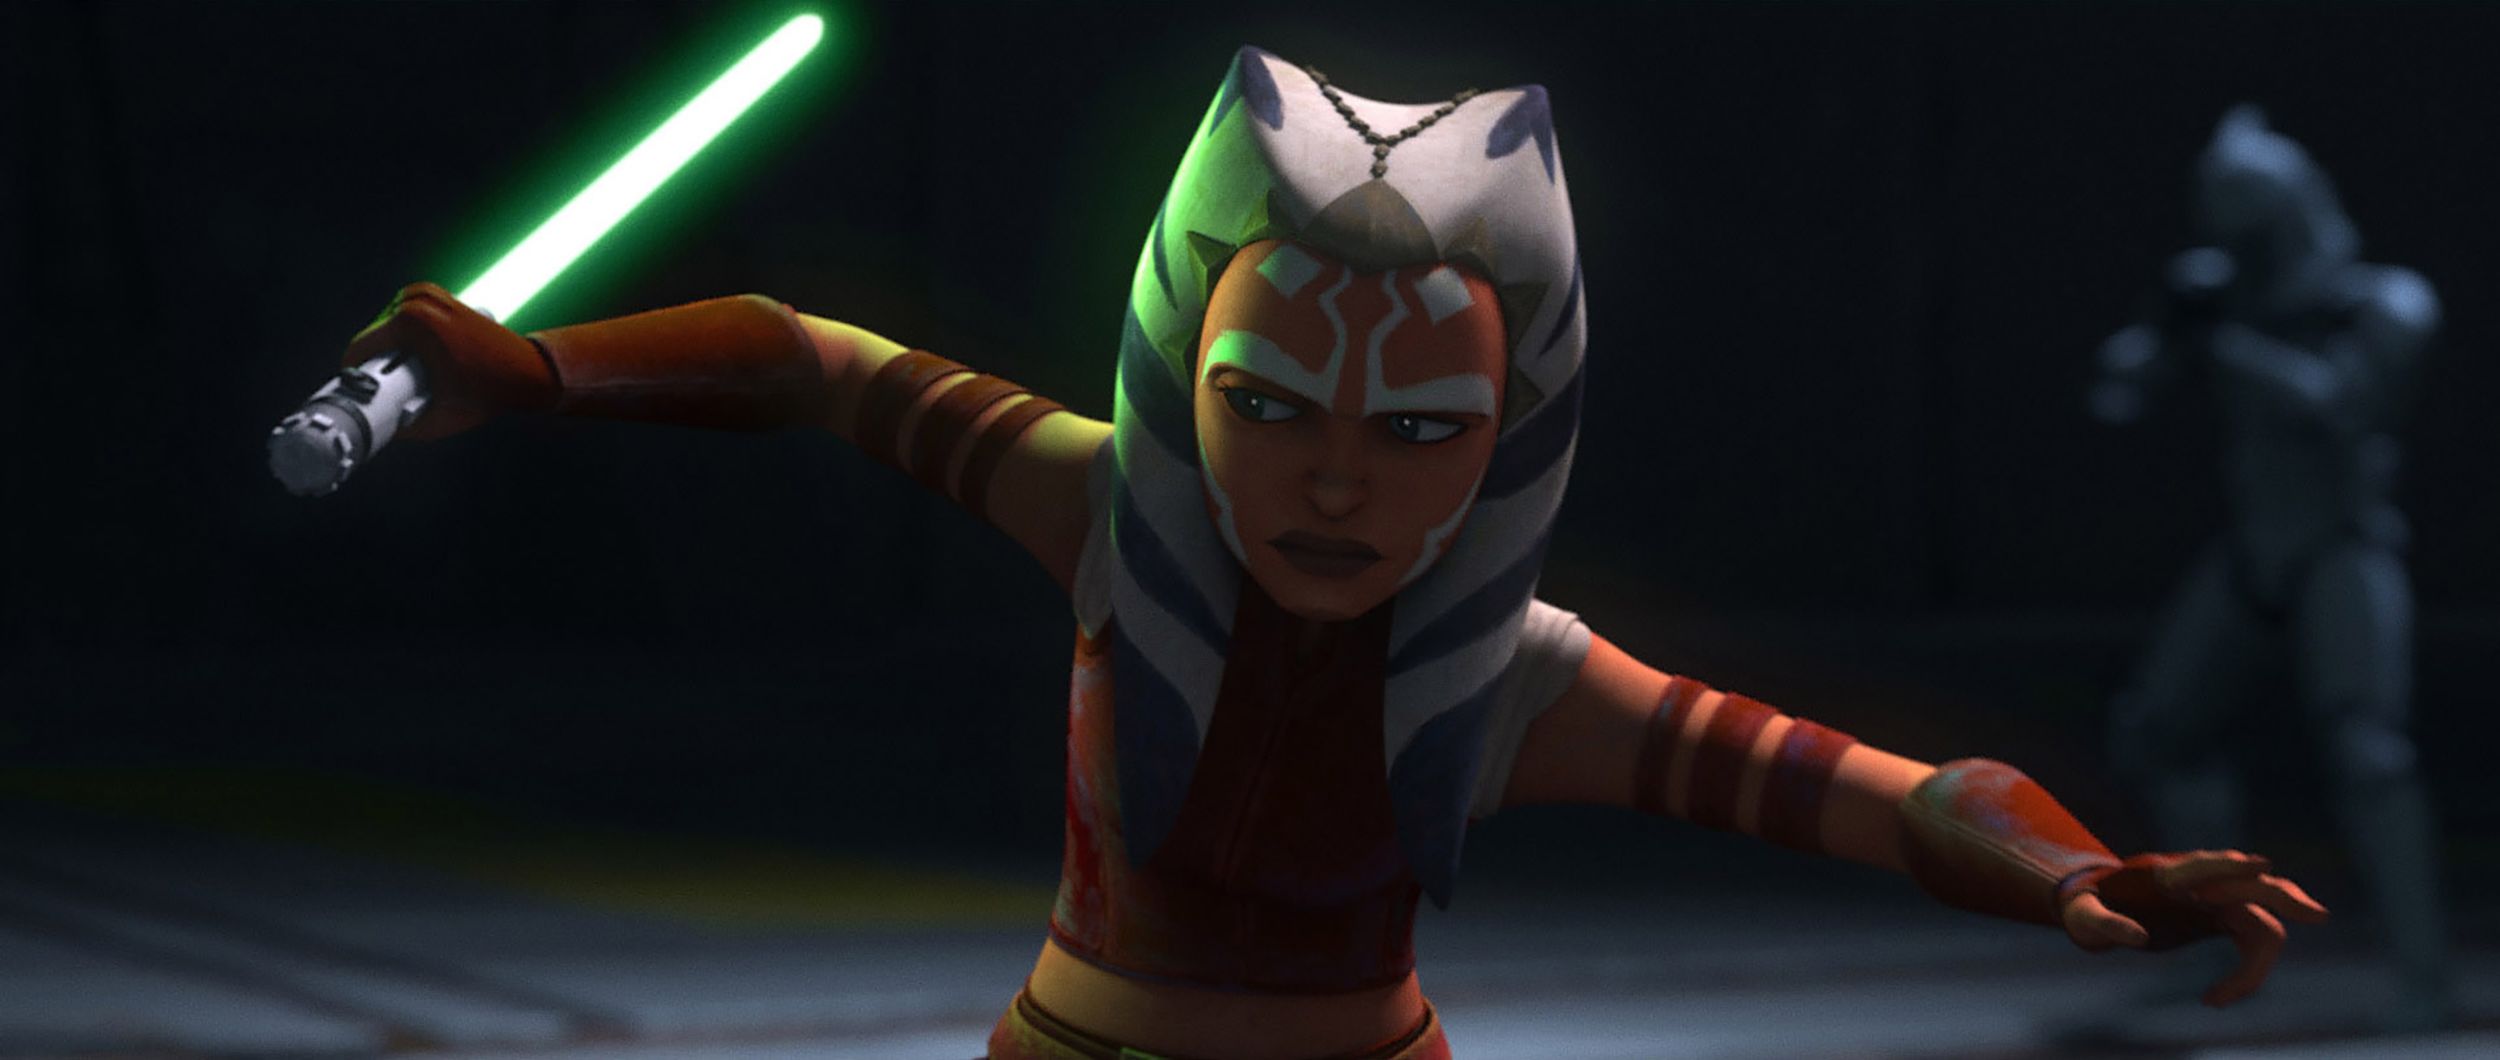 Star Wars: Tales of the Jedi' review: Ahsoka Tano and Count Dooku shorts  show animation remains a creative force in Lucasfilm's galaxy | CNN